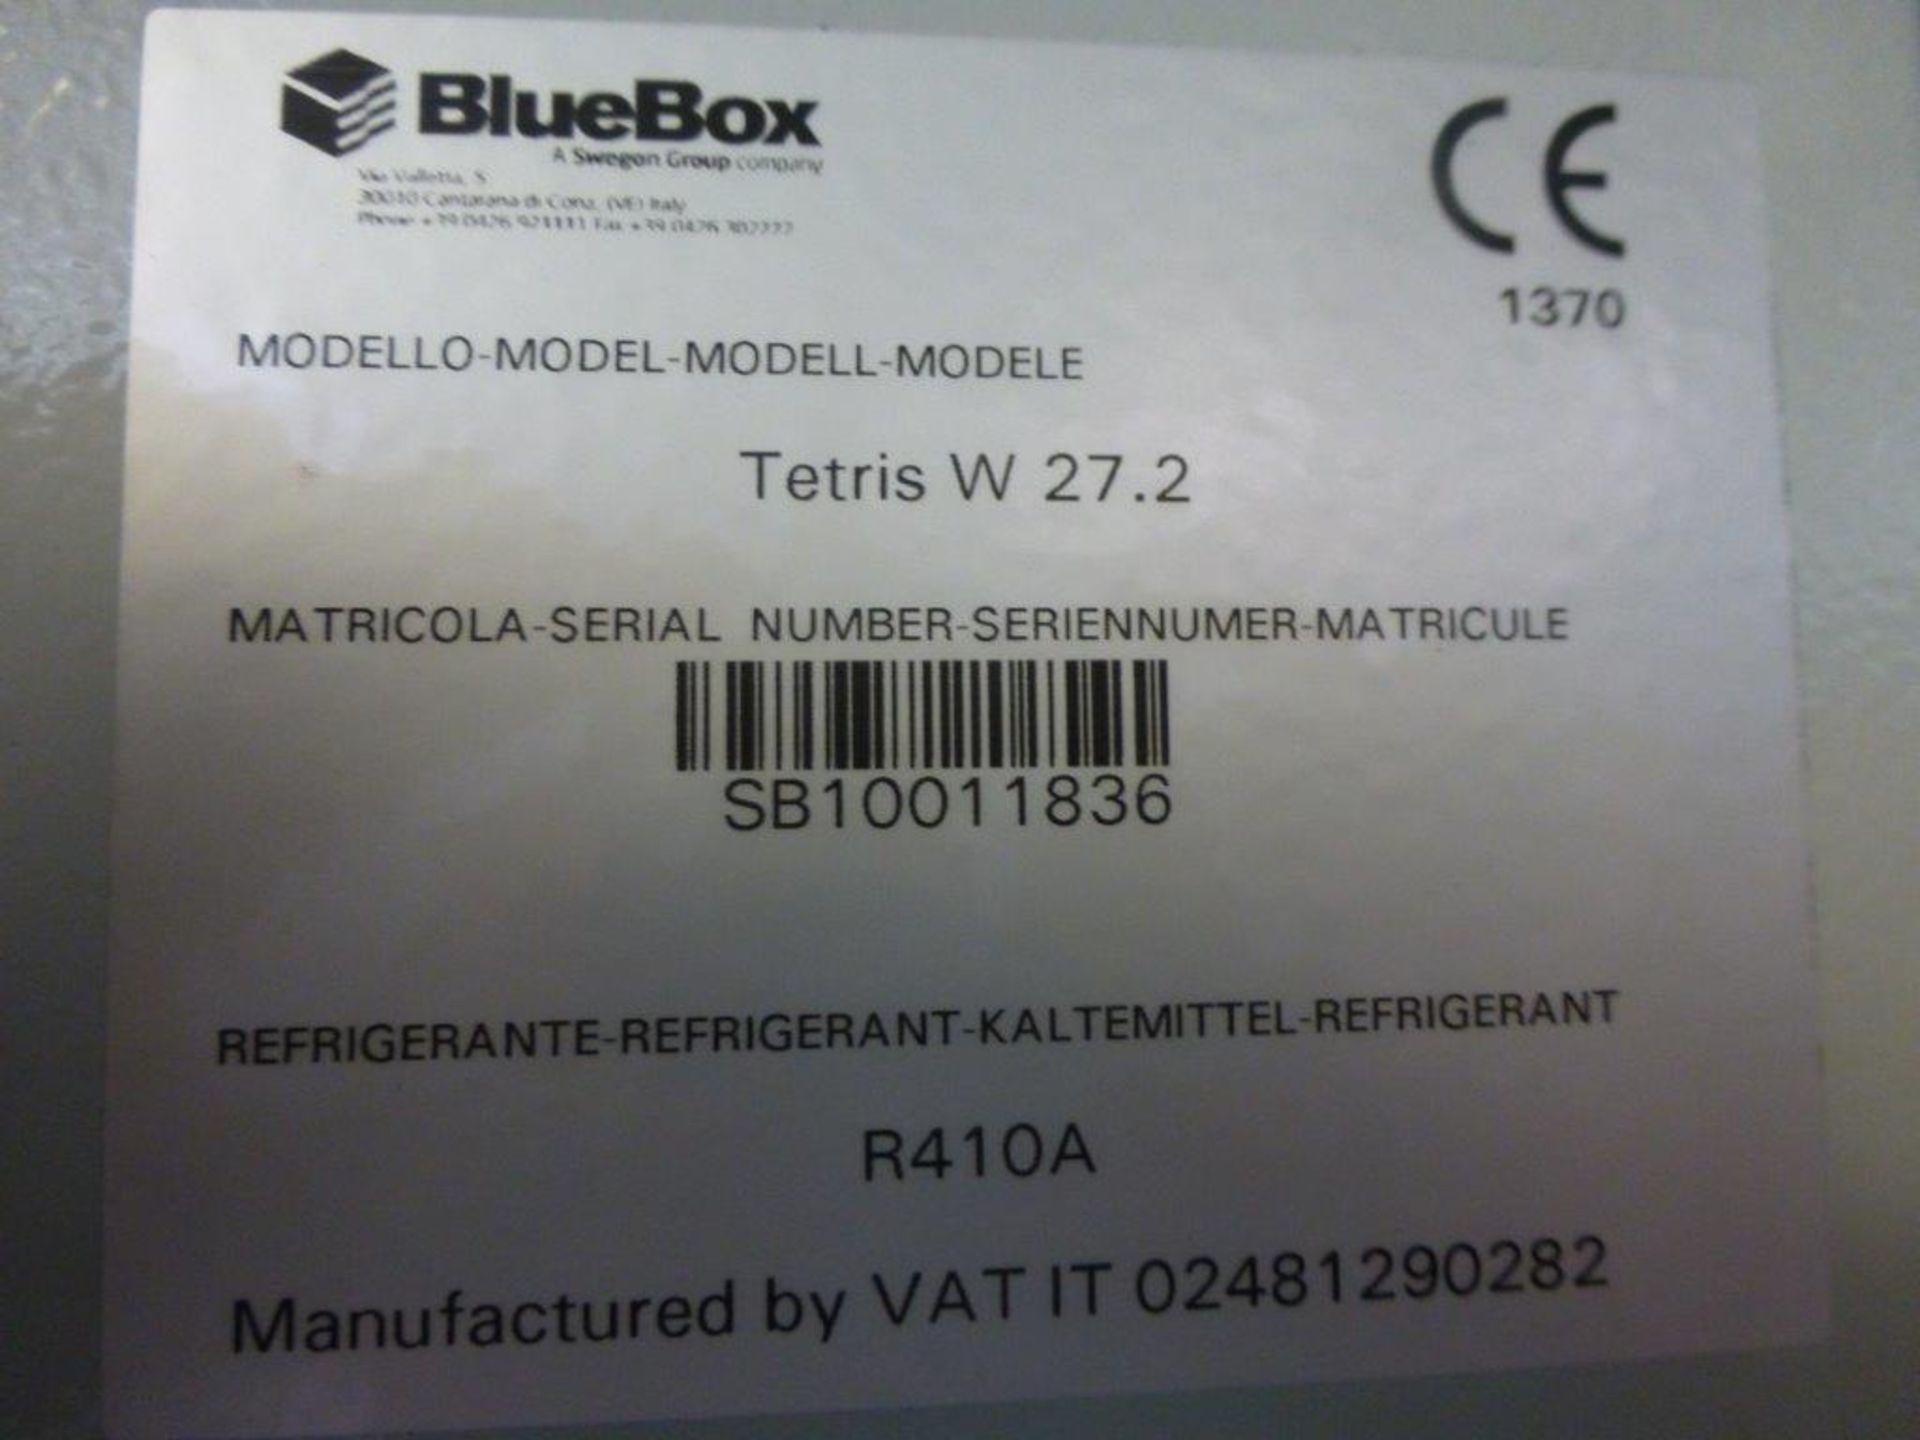 BlueBox Tetris W 27.2 water chiller, serial No SP10111836, Chiller No 3, (Disconnection at first - Image 3 of 3